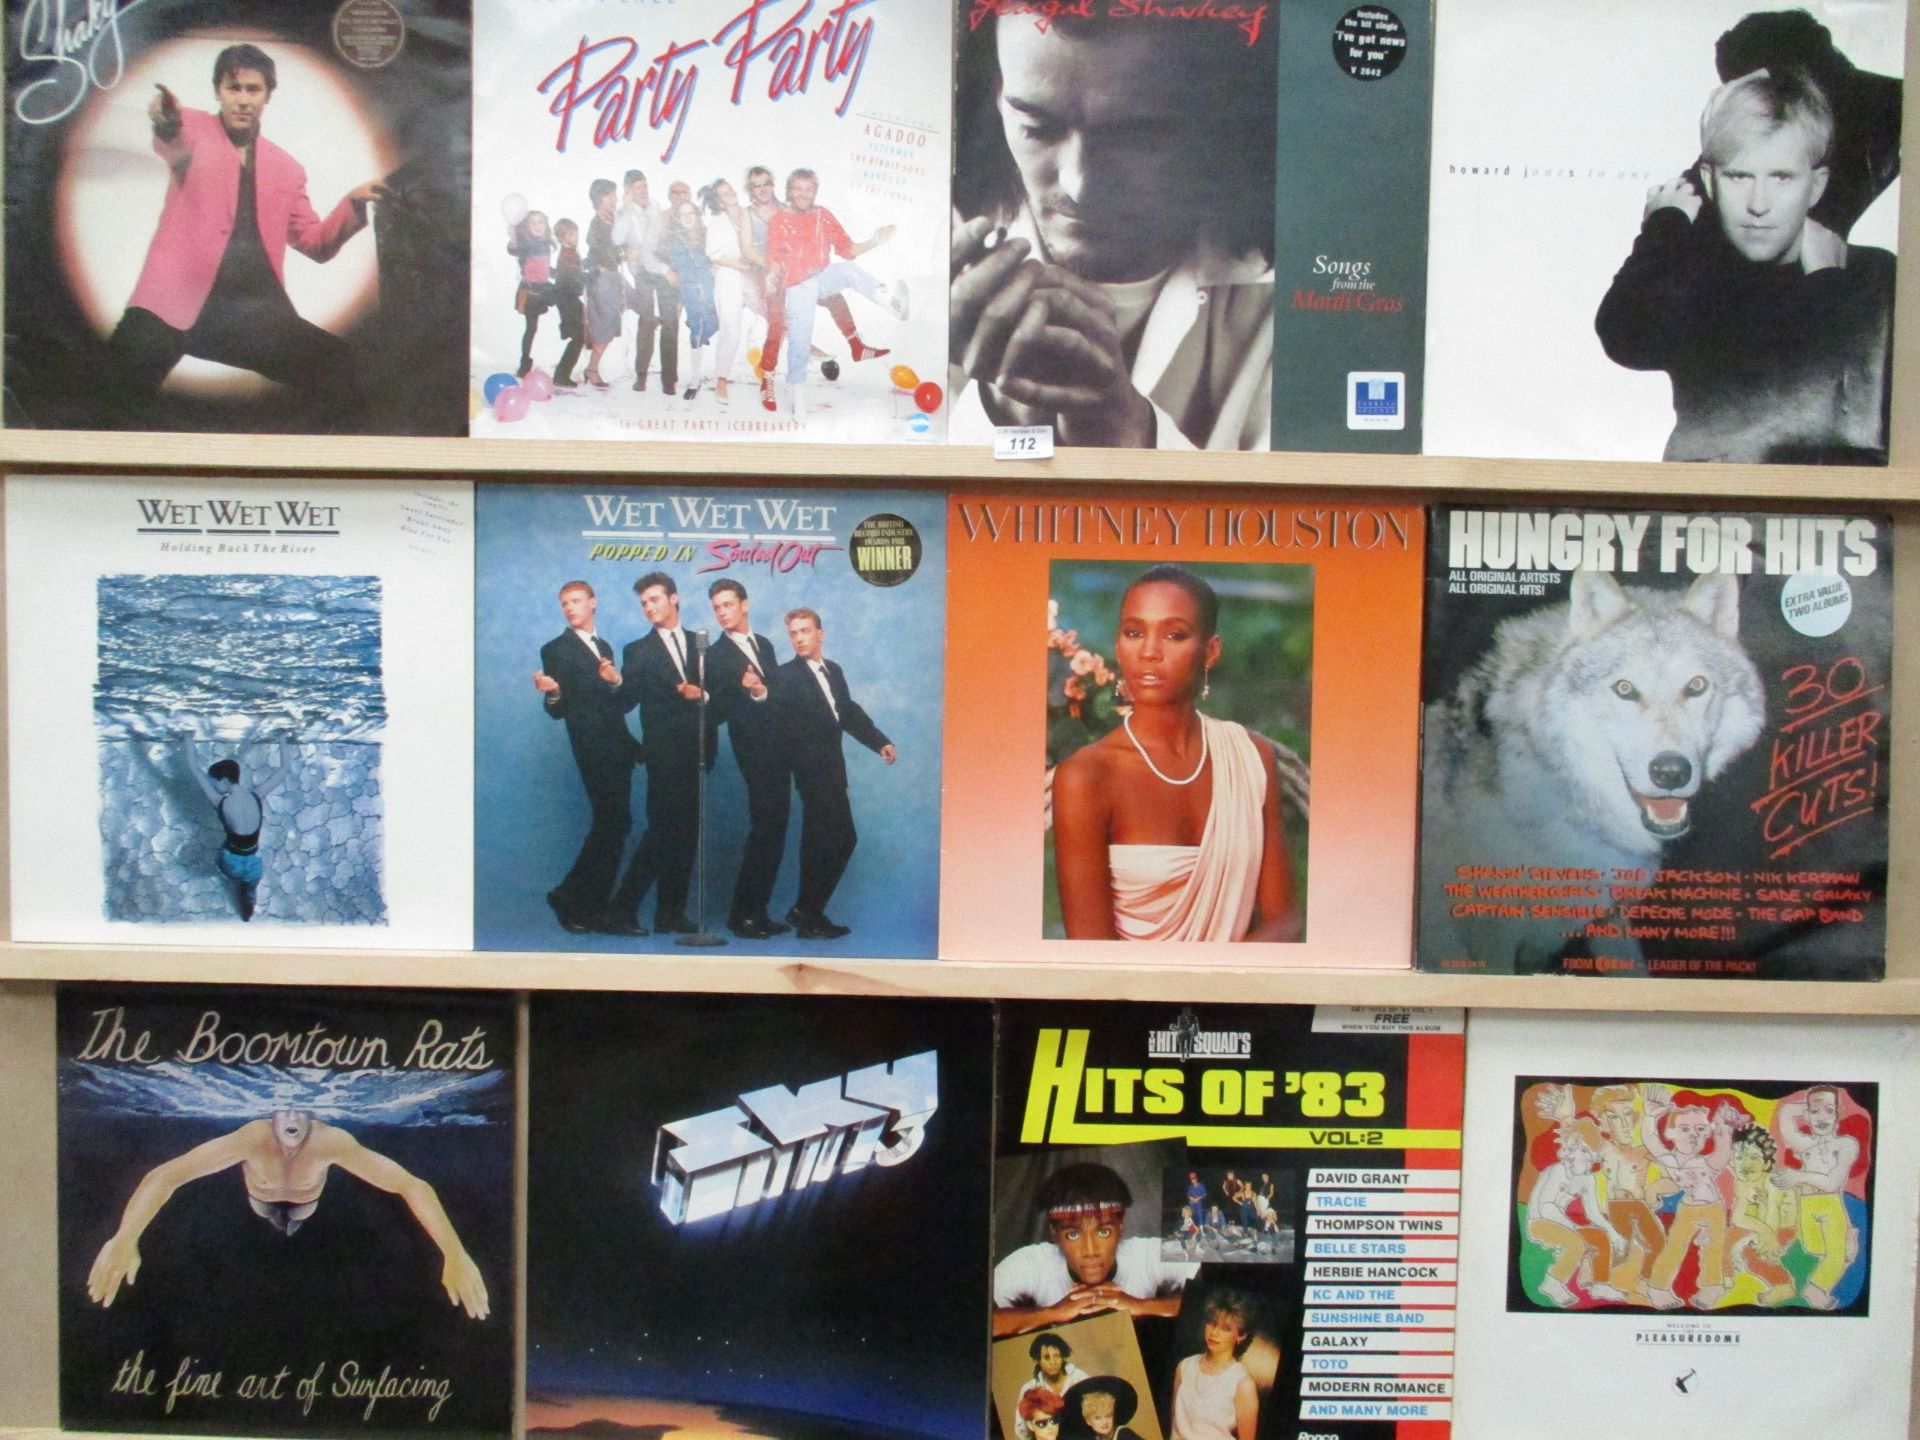 11 x 1980s LPs (including 1 x double), including Wet Wet Wet and The Boomtown Rats,